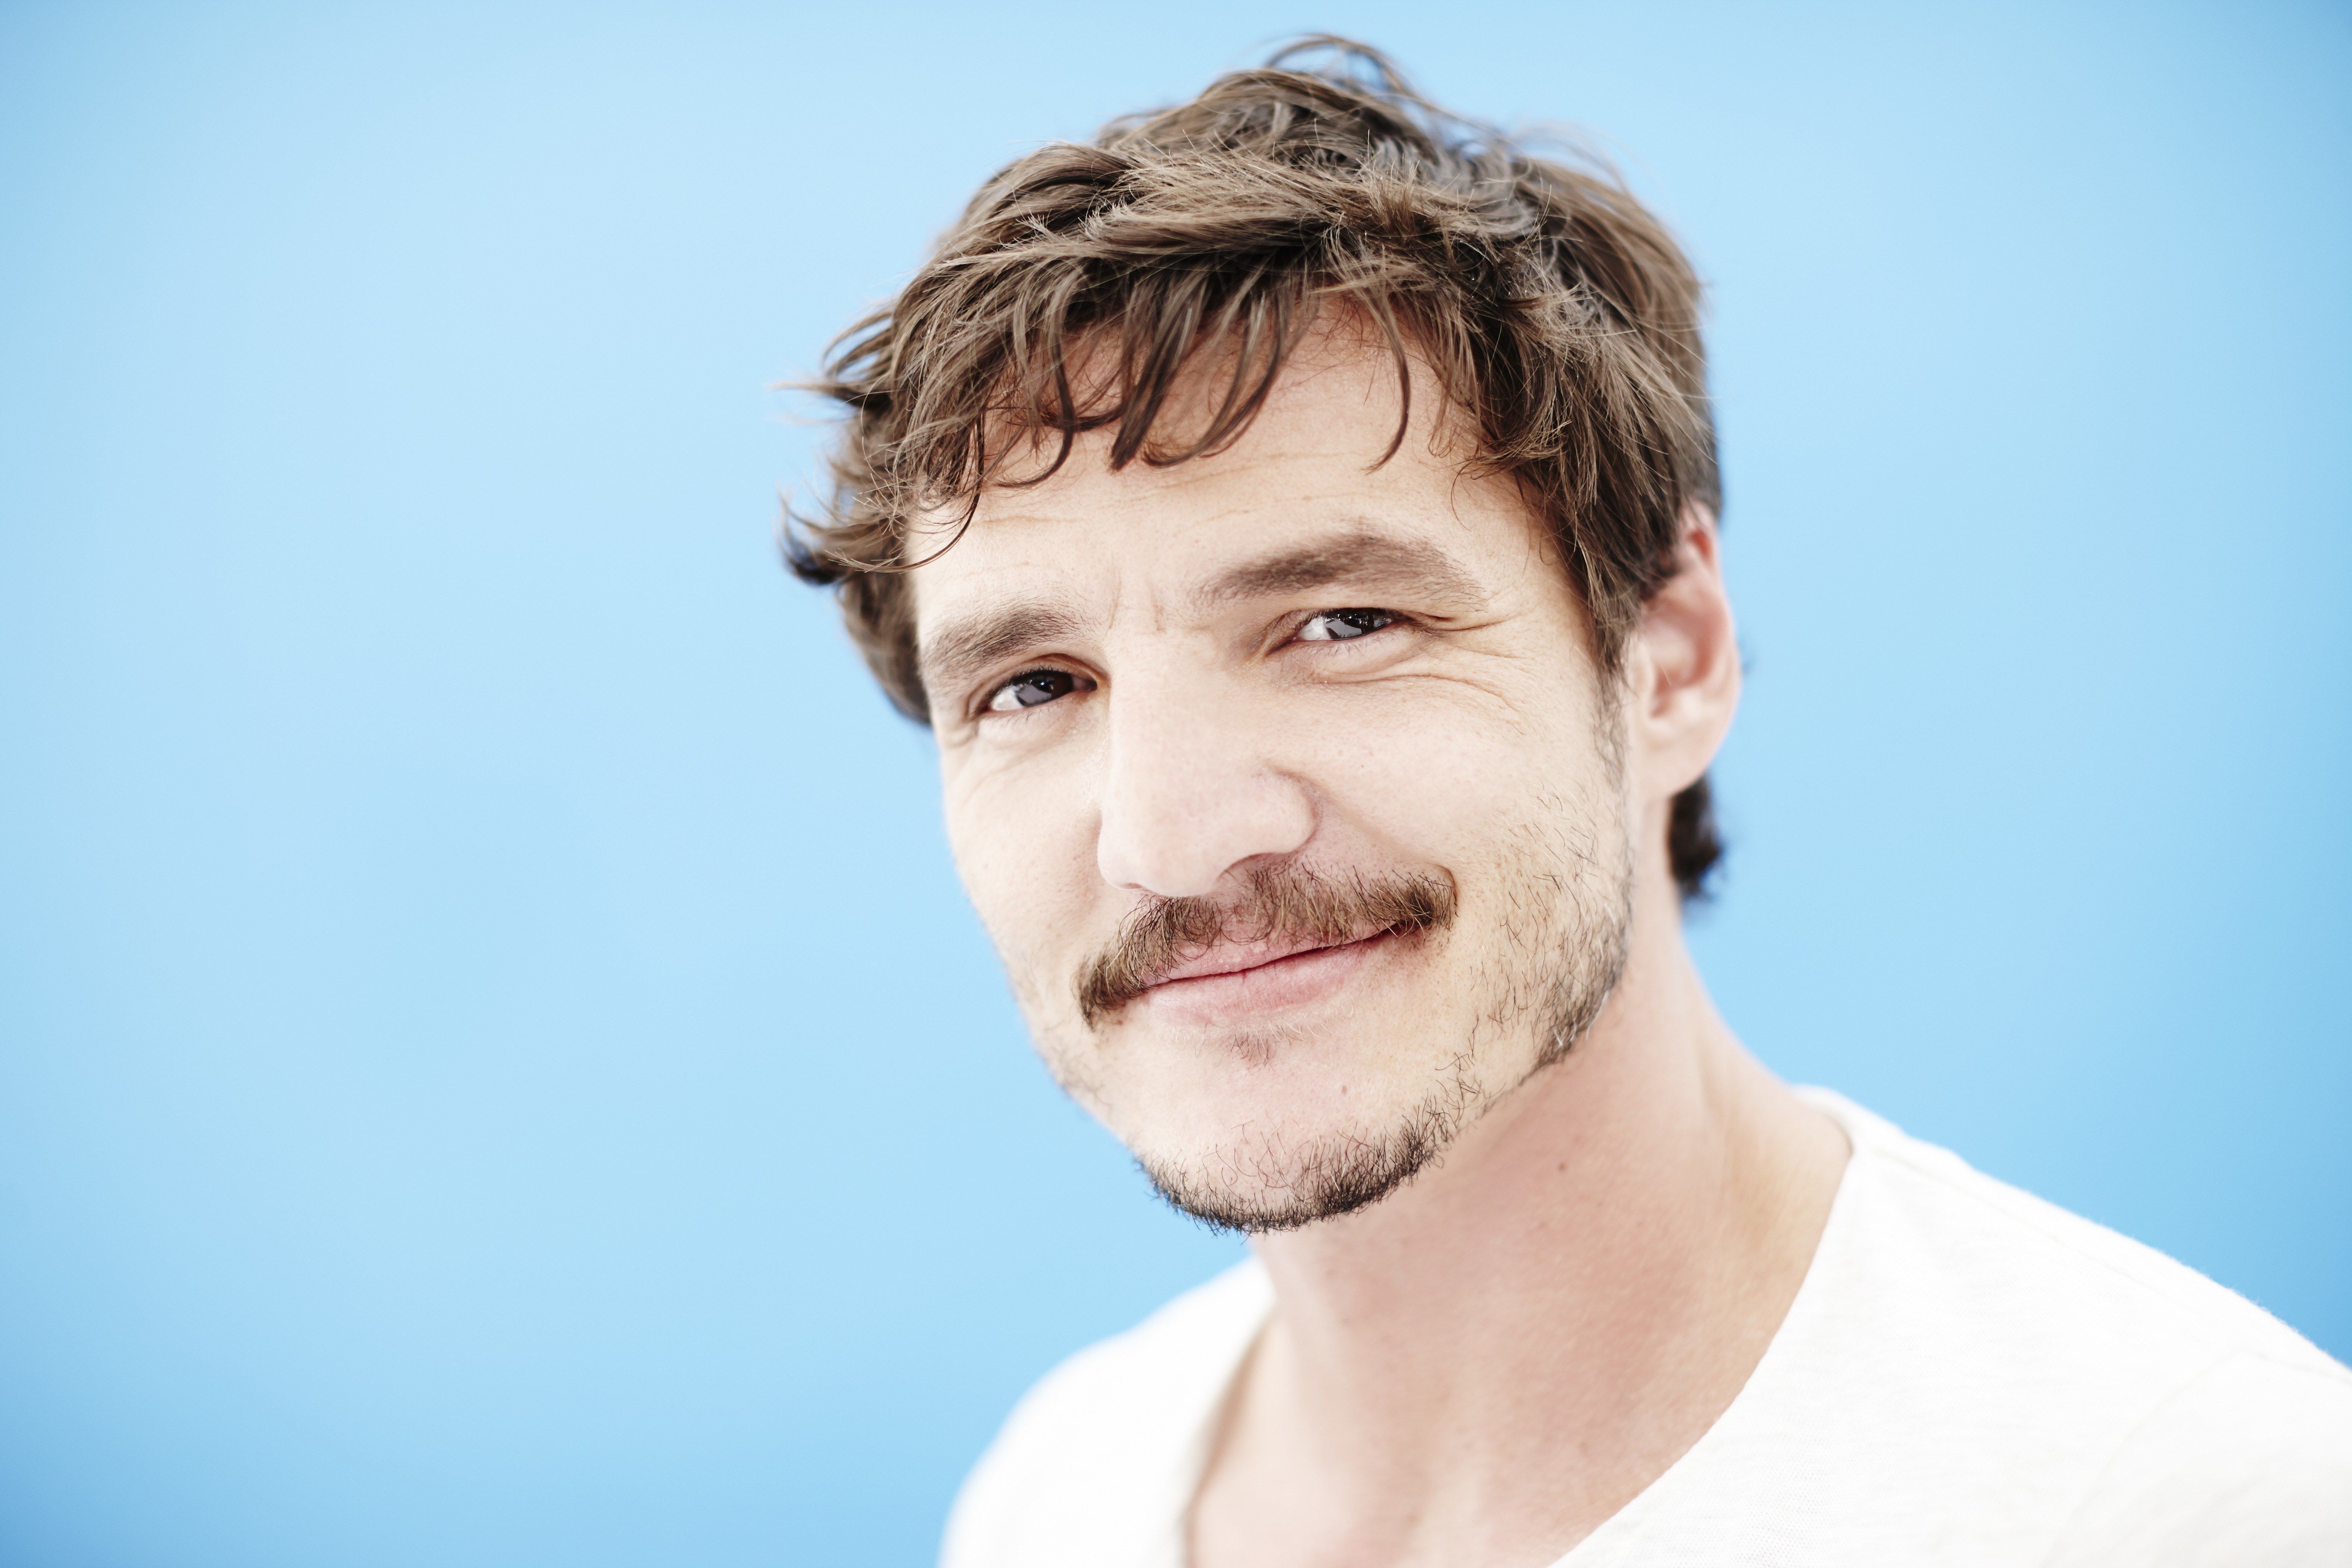 Pedro Pascal Wallpaper Image Photo Picture Background